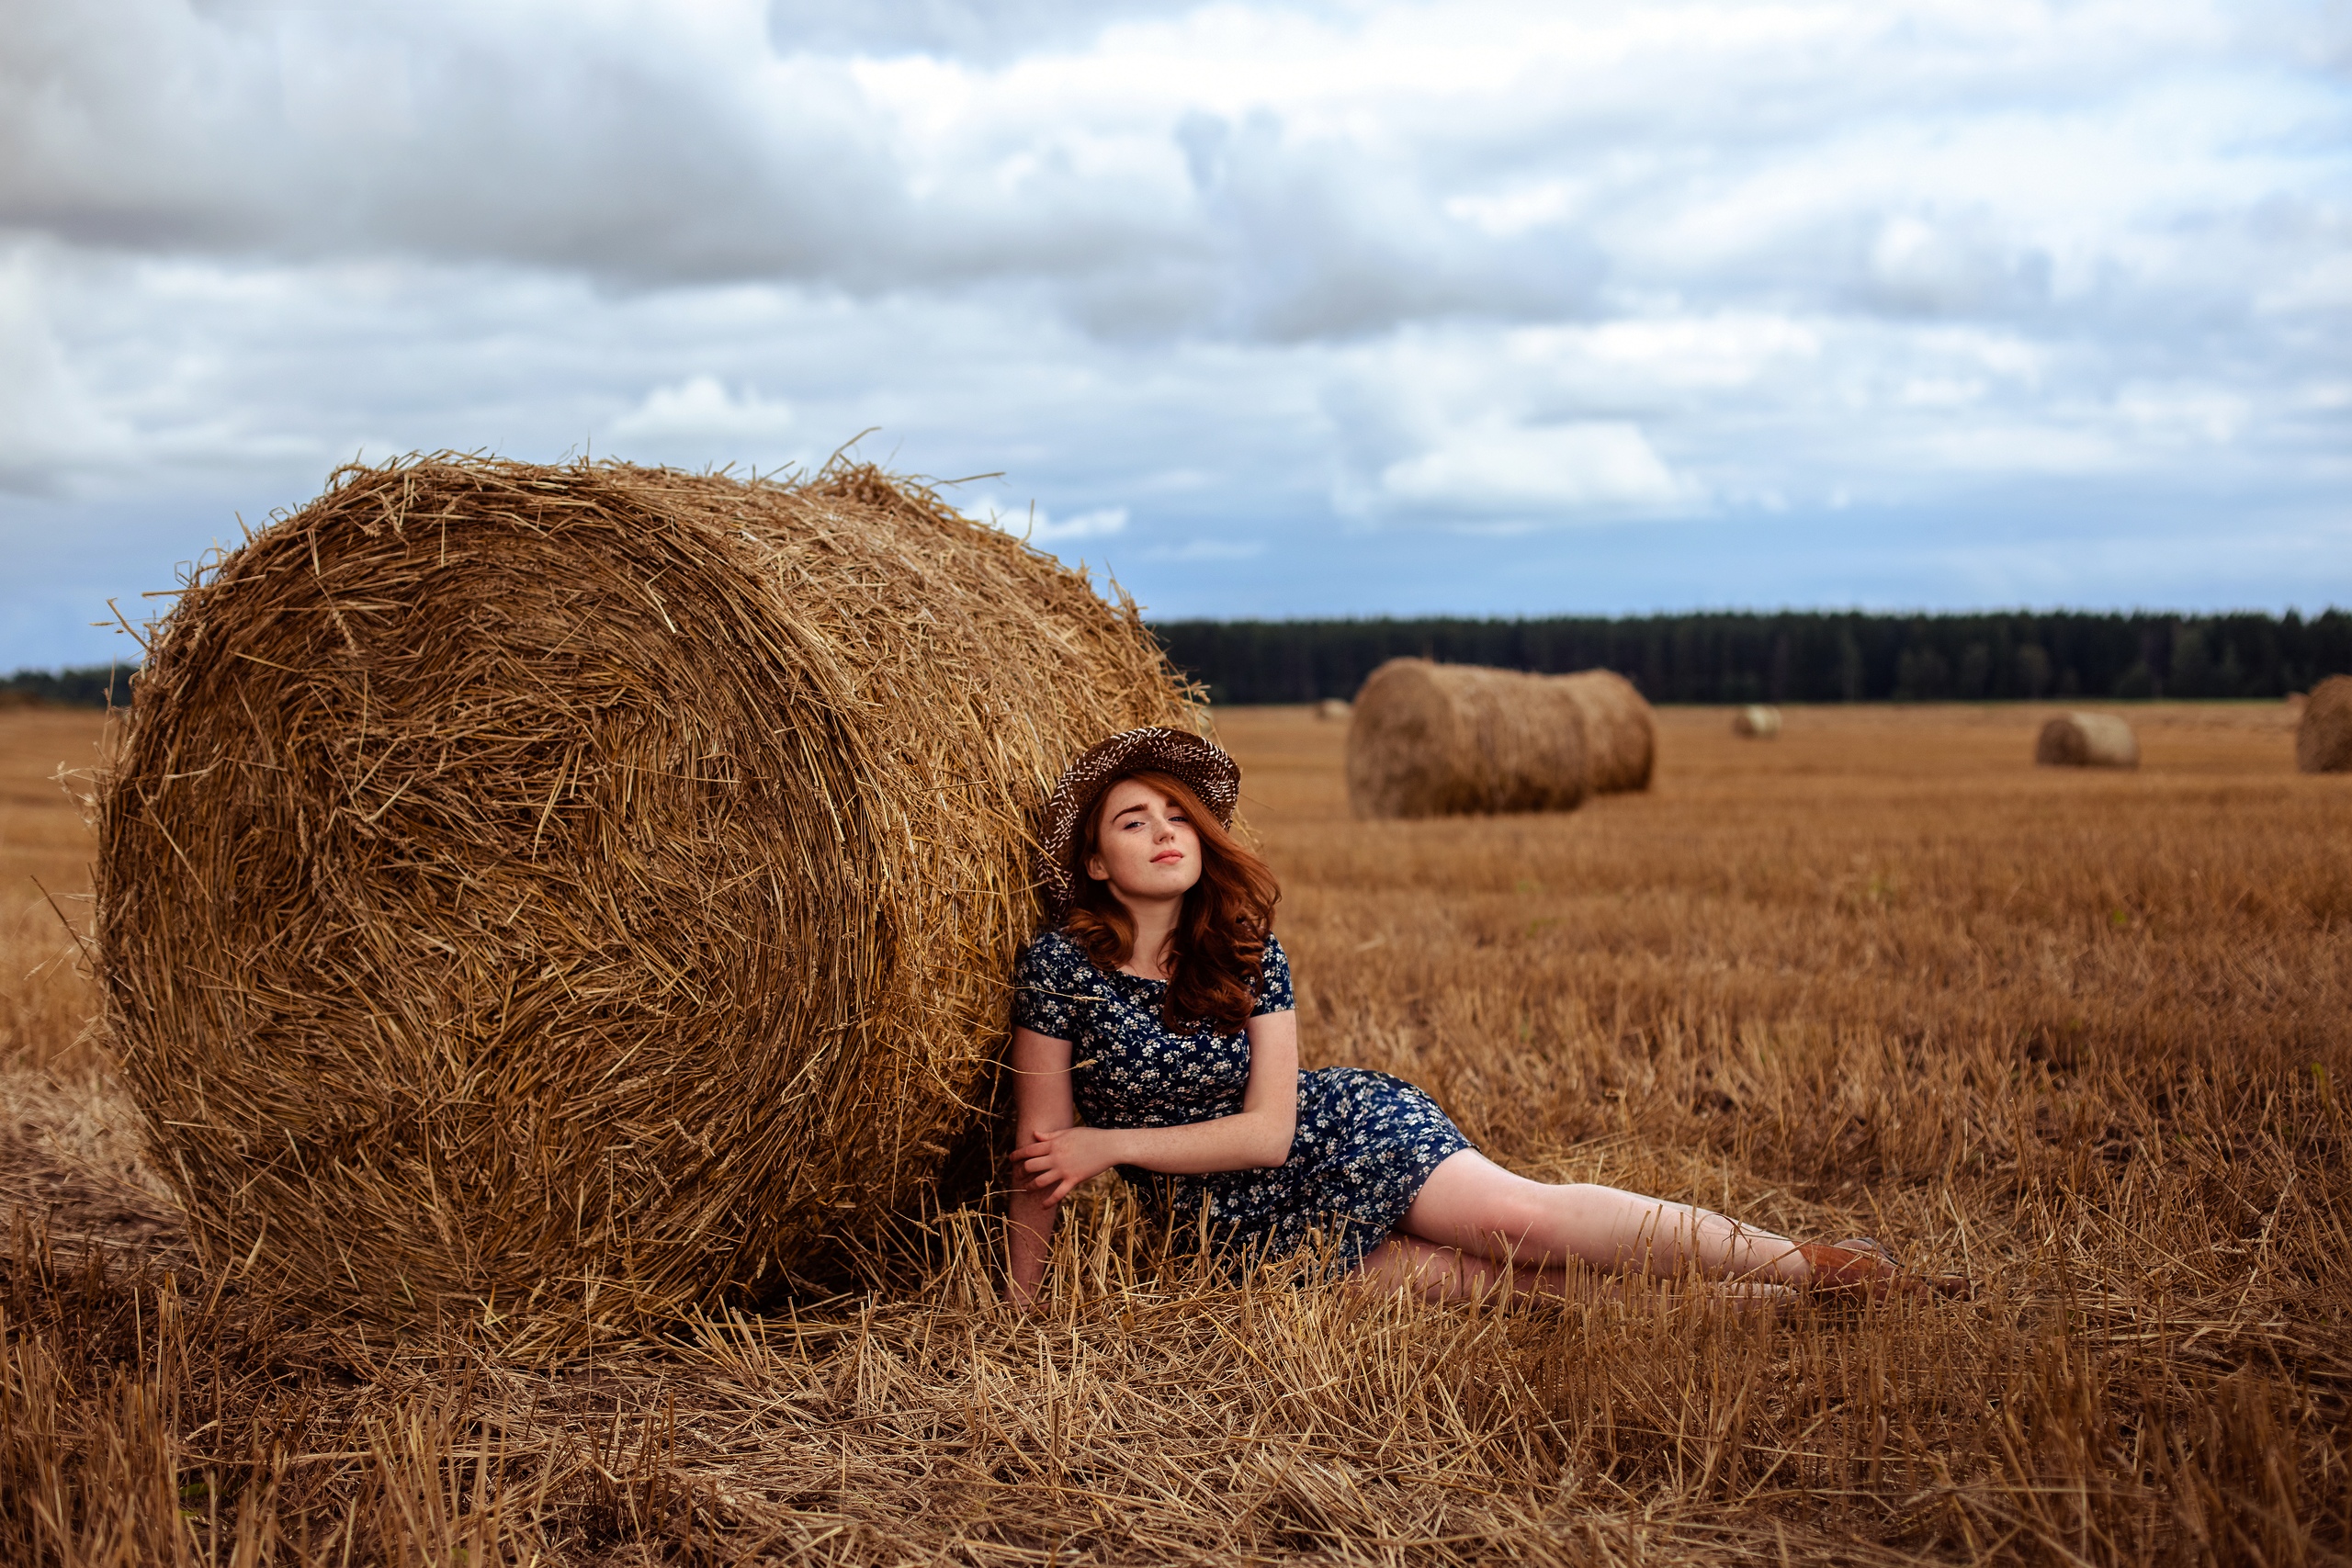 People 2560x1707 women model redhead looking at viewer on the floor women with hats hay dress women outdoors hay bales flower dress